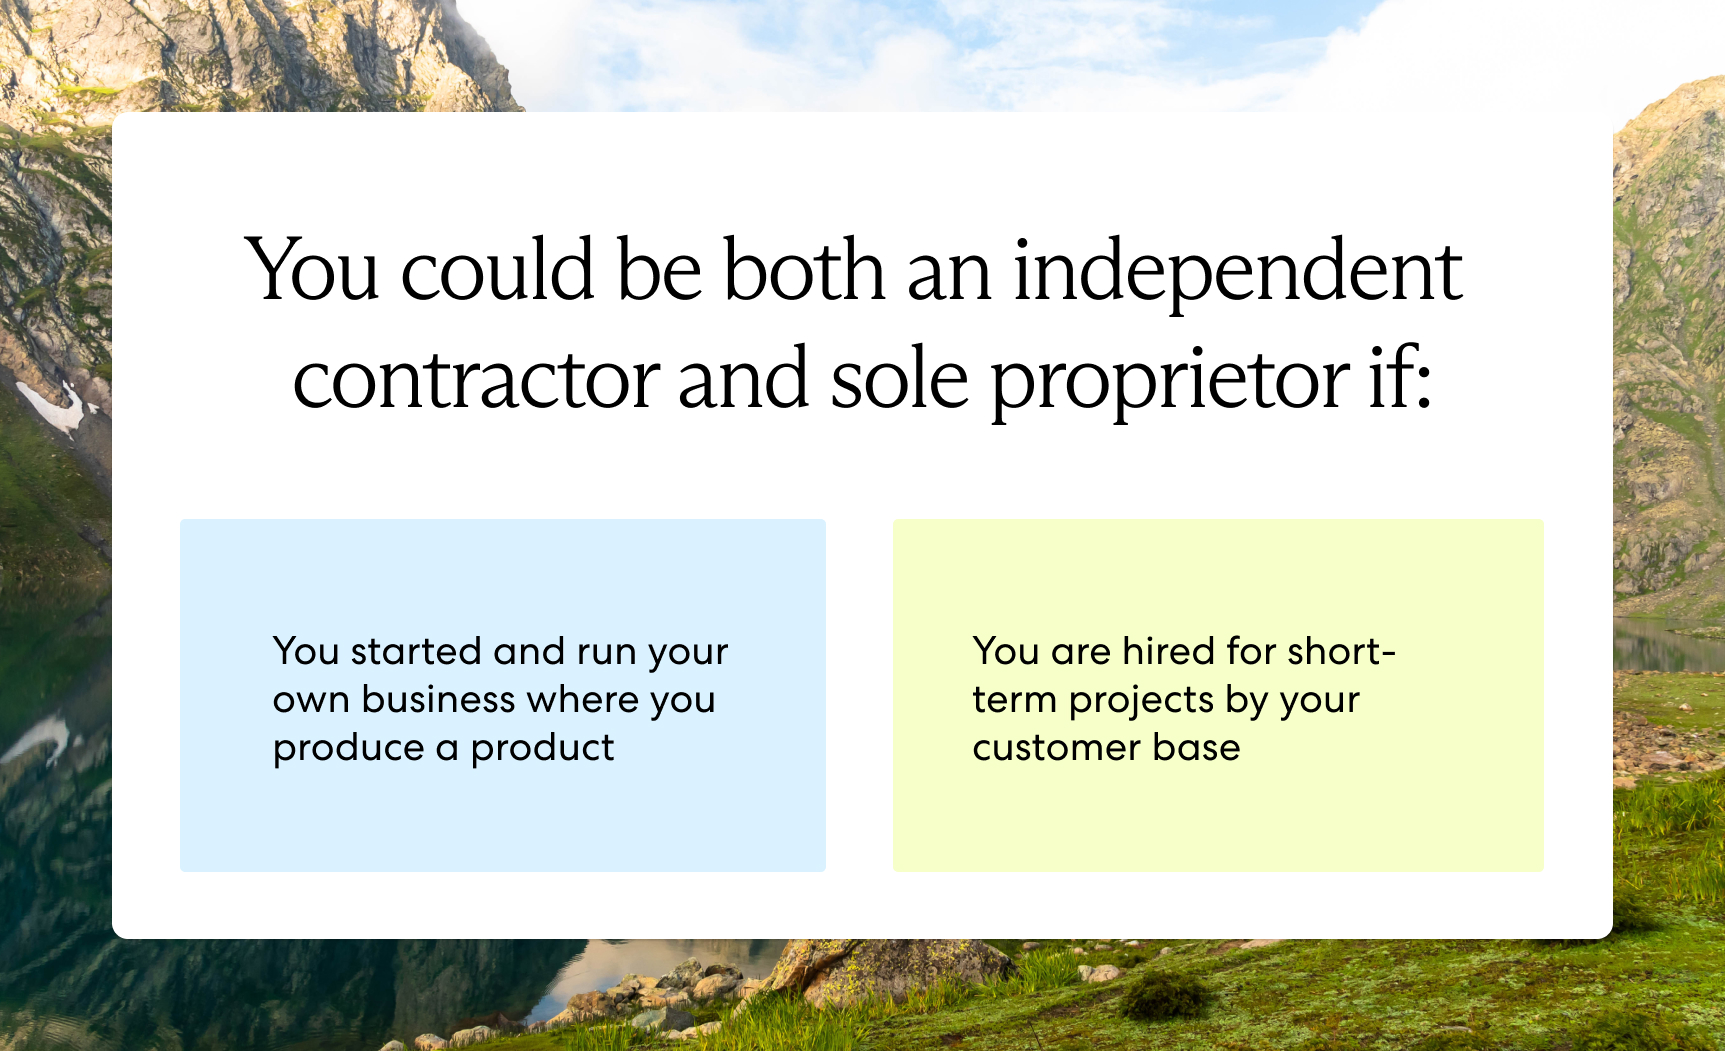 You could be both an independent contractor and sole proprietor 